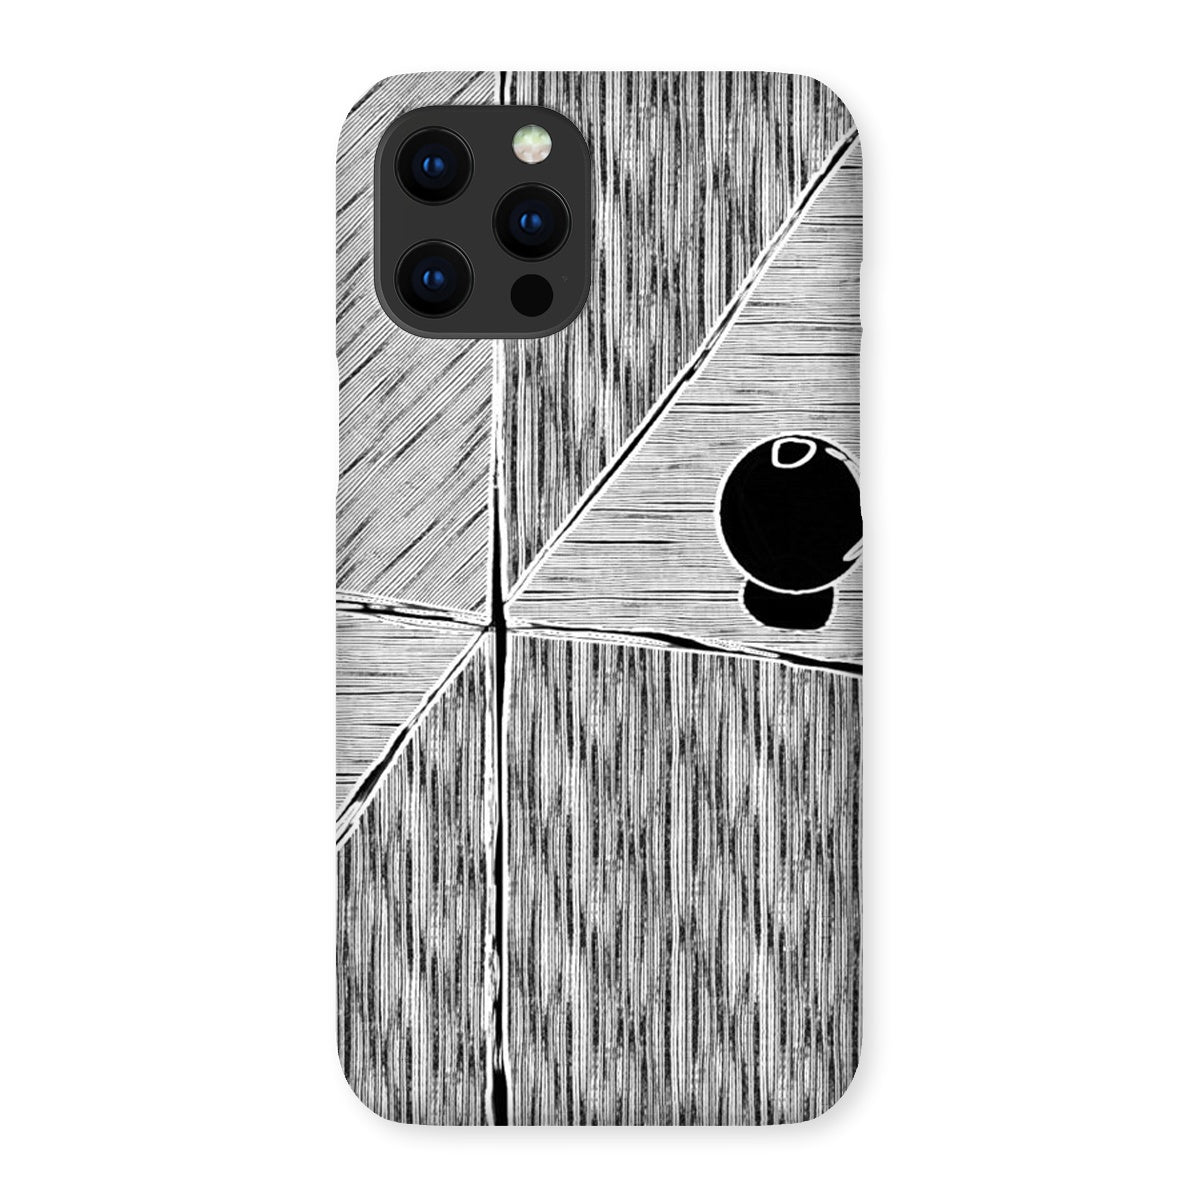 Your Turn - Snap Phone Case